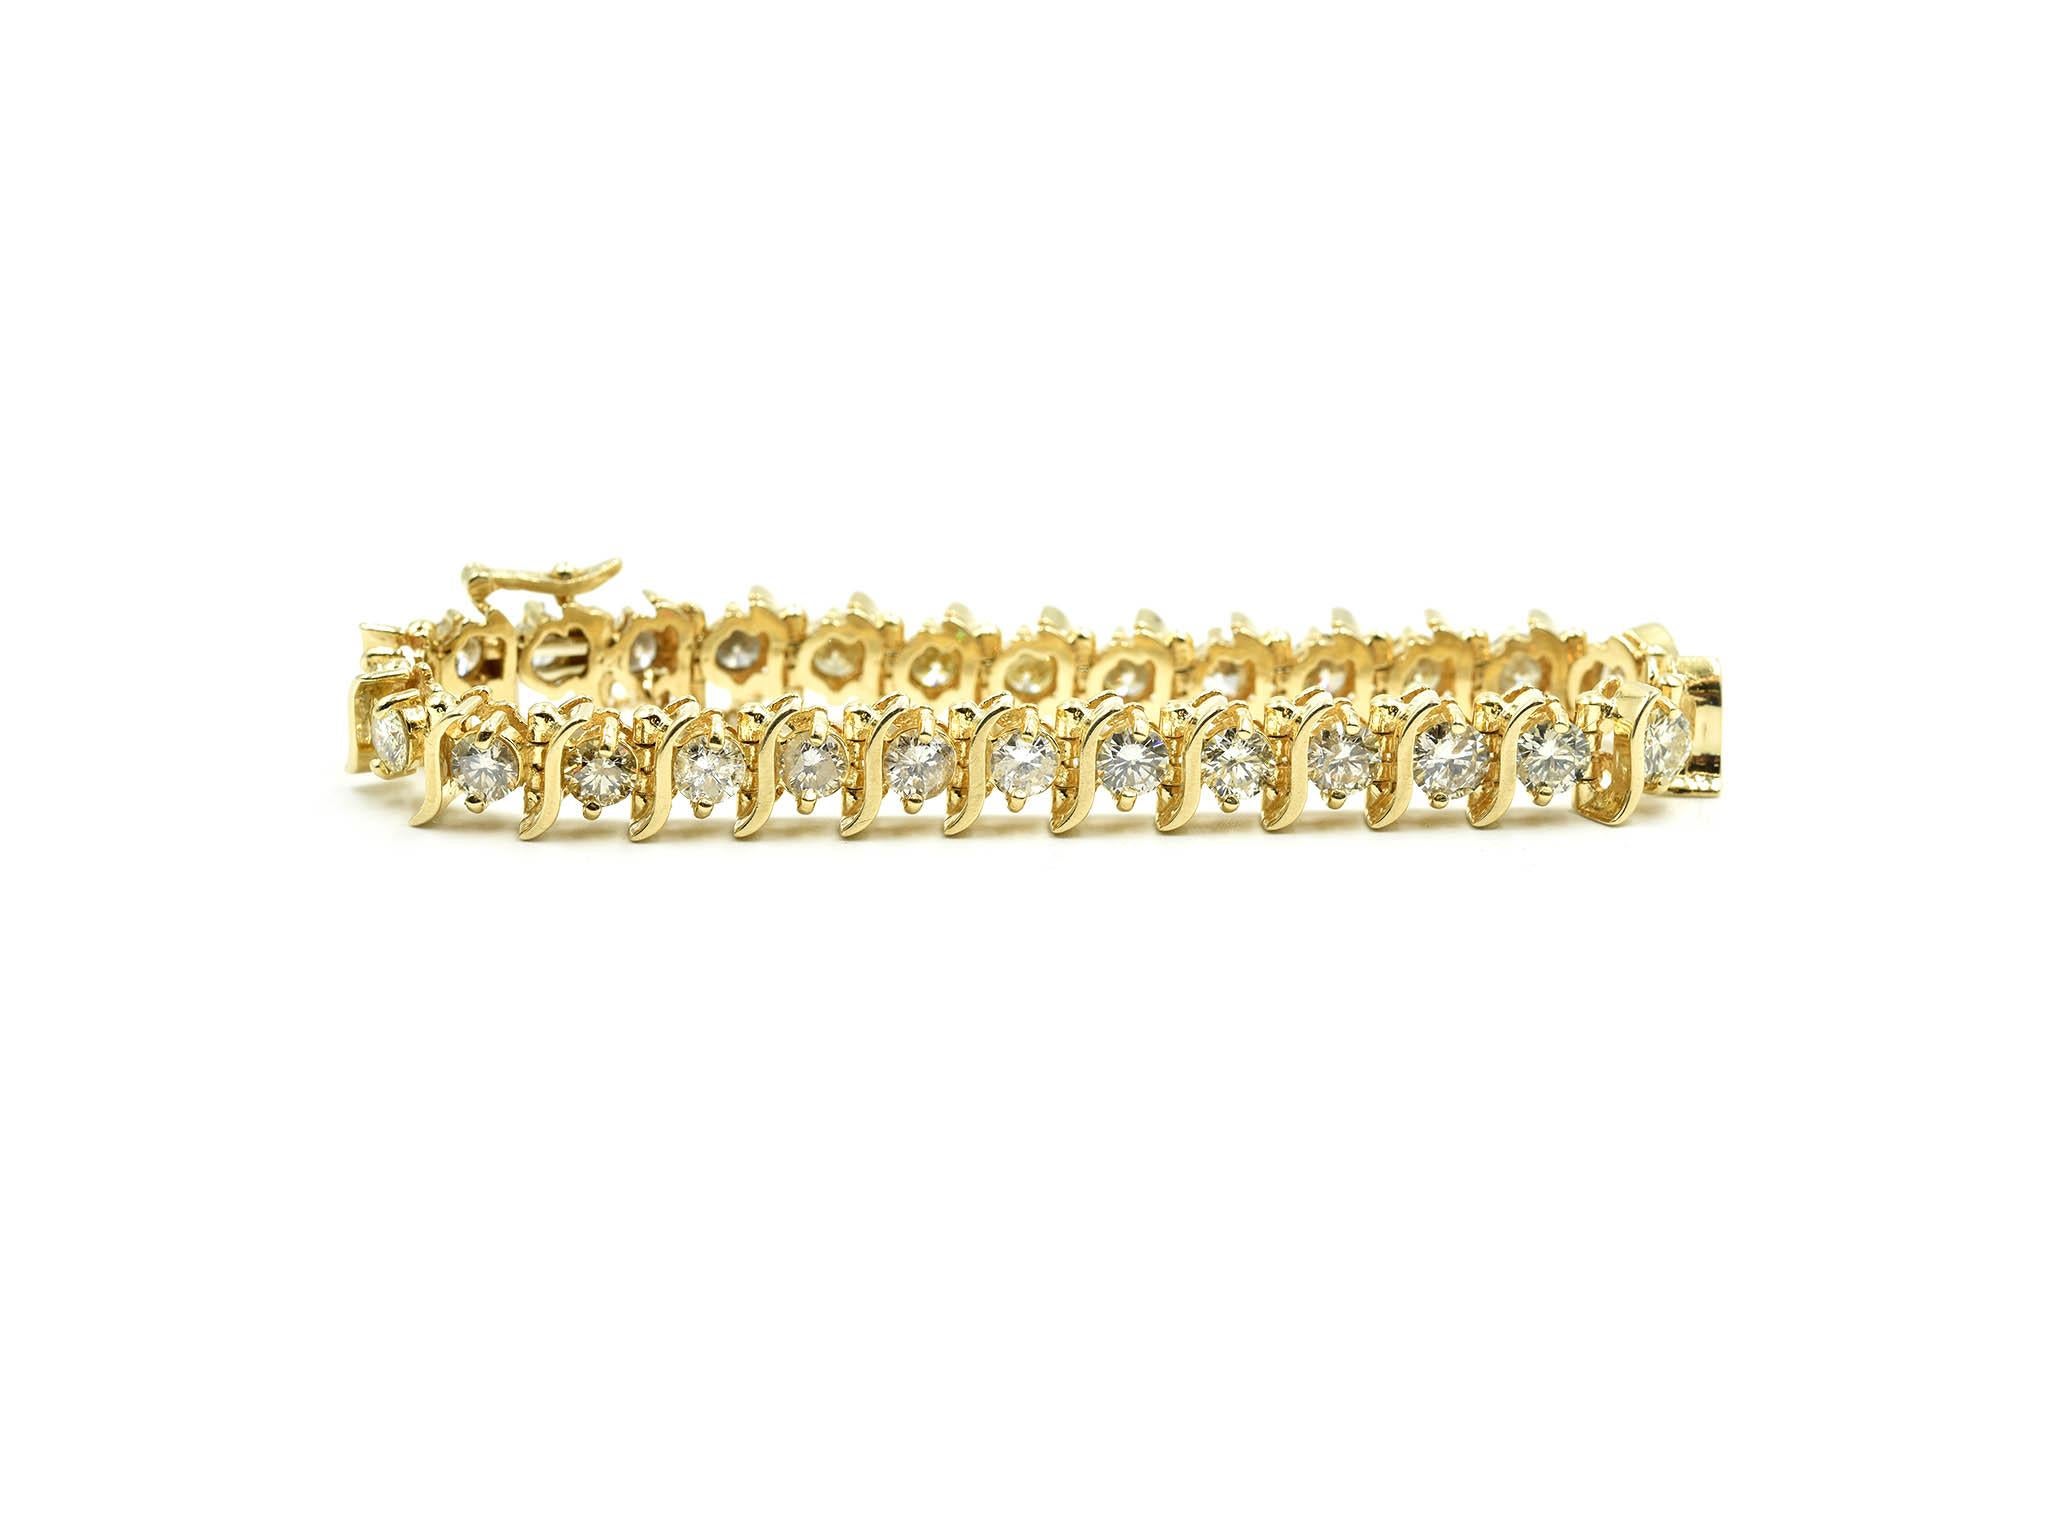 Designer: custom design
Material: 14k yellow gold
Diamonds: 28 round brilliant cut diamonds = 10.00 carat total weight
Color: J
Clarity: SI3
Dimensions: bracelet will fit 6 3/4-inch wrist
Weight: 26.68 grams
